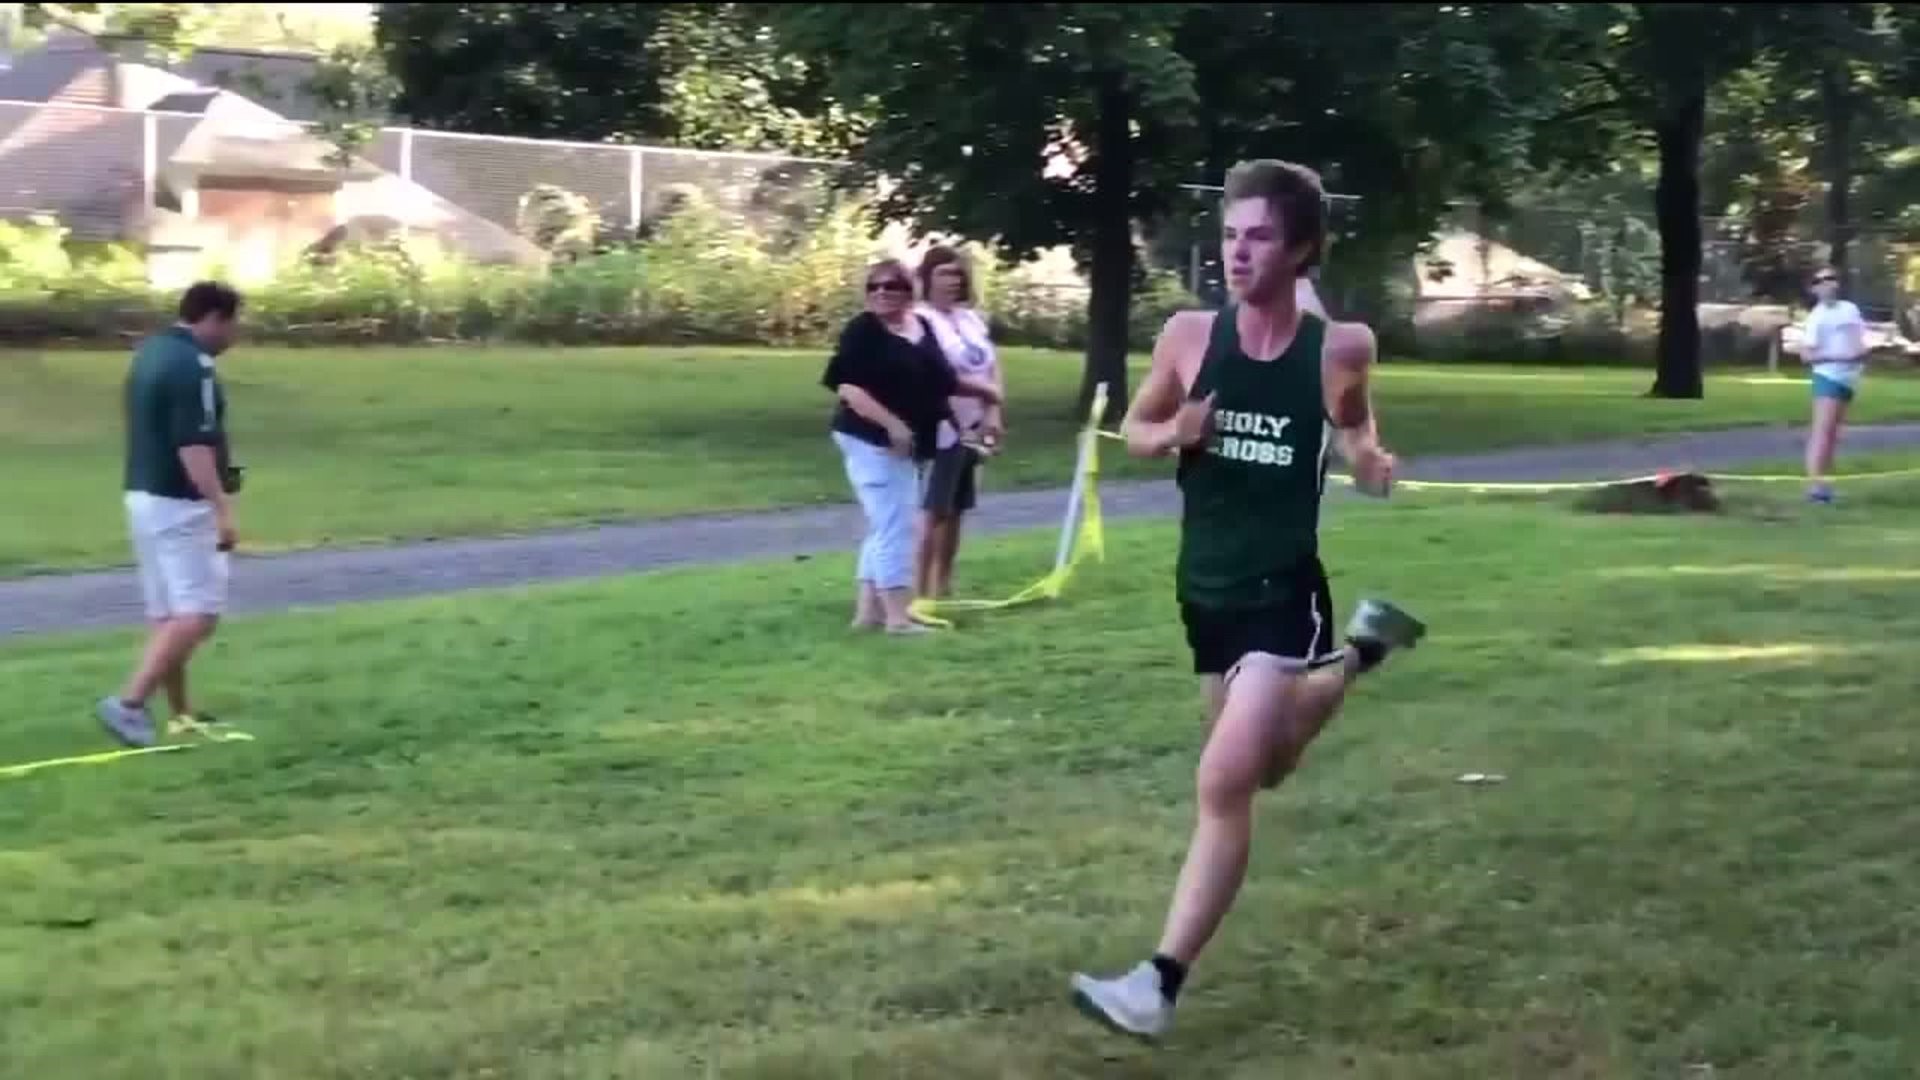 Andrew Healey Sets Nay Aug Park Course Record of 16:15